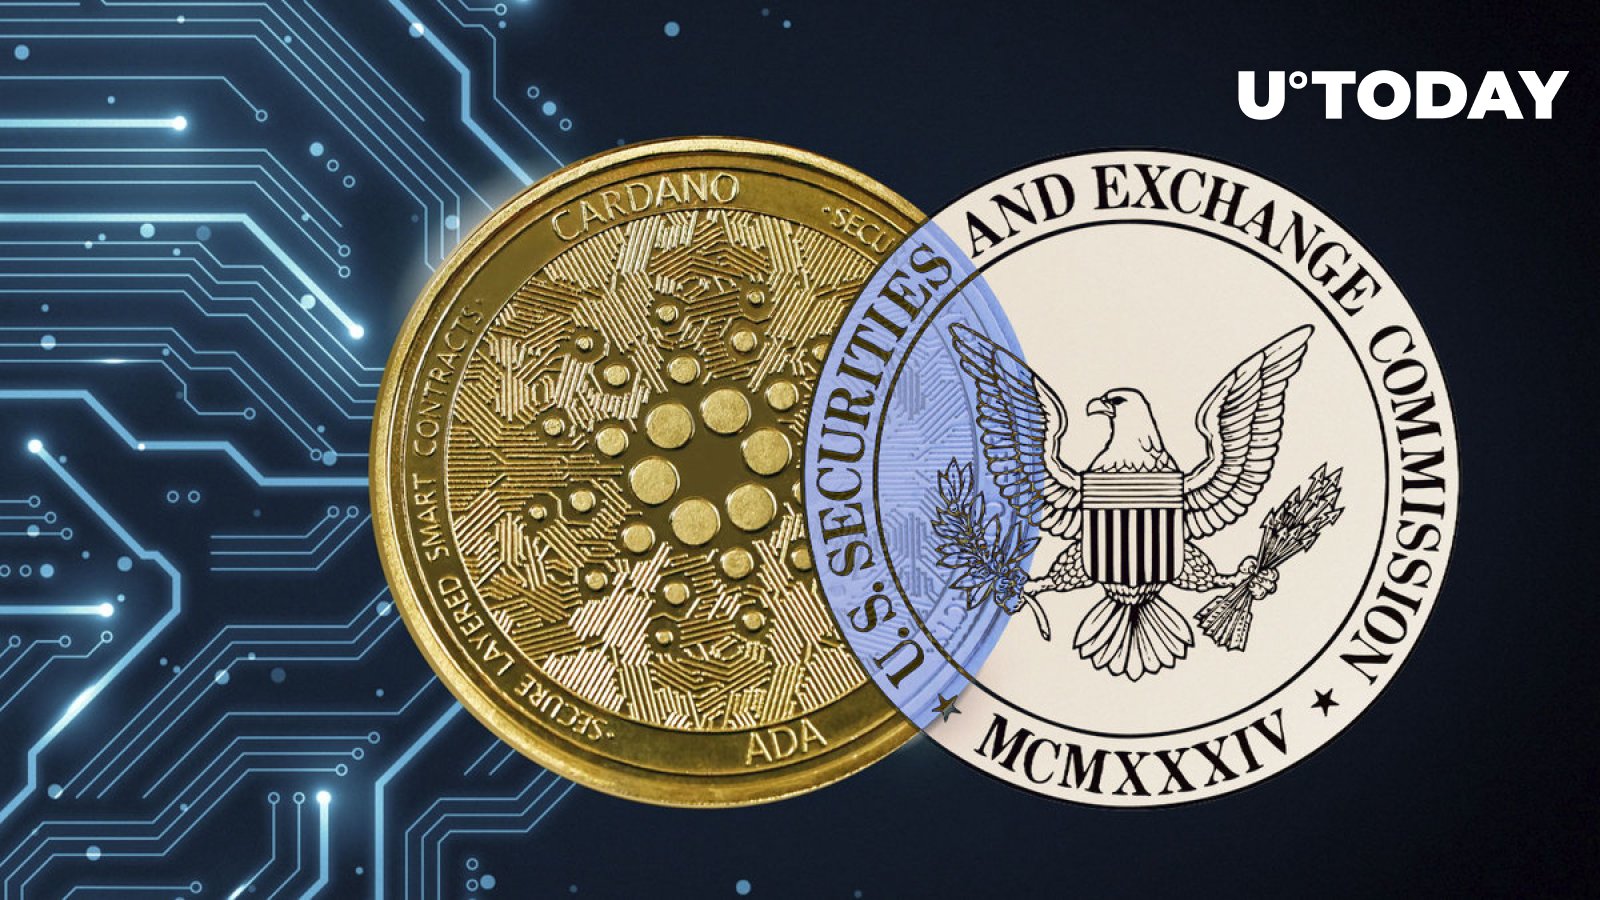 Will Cardano reach 0$ as the SEC Labels it a Security?